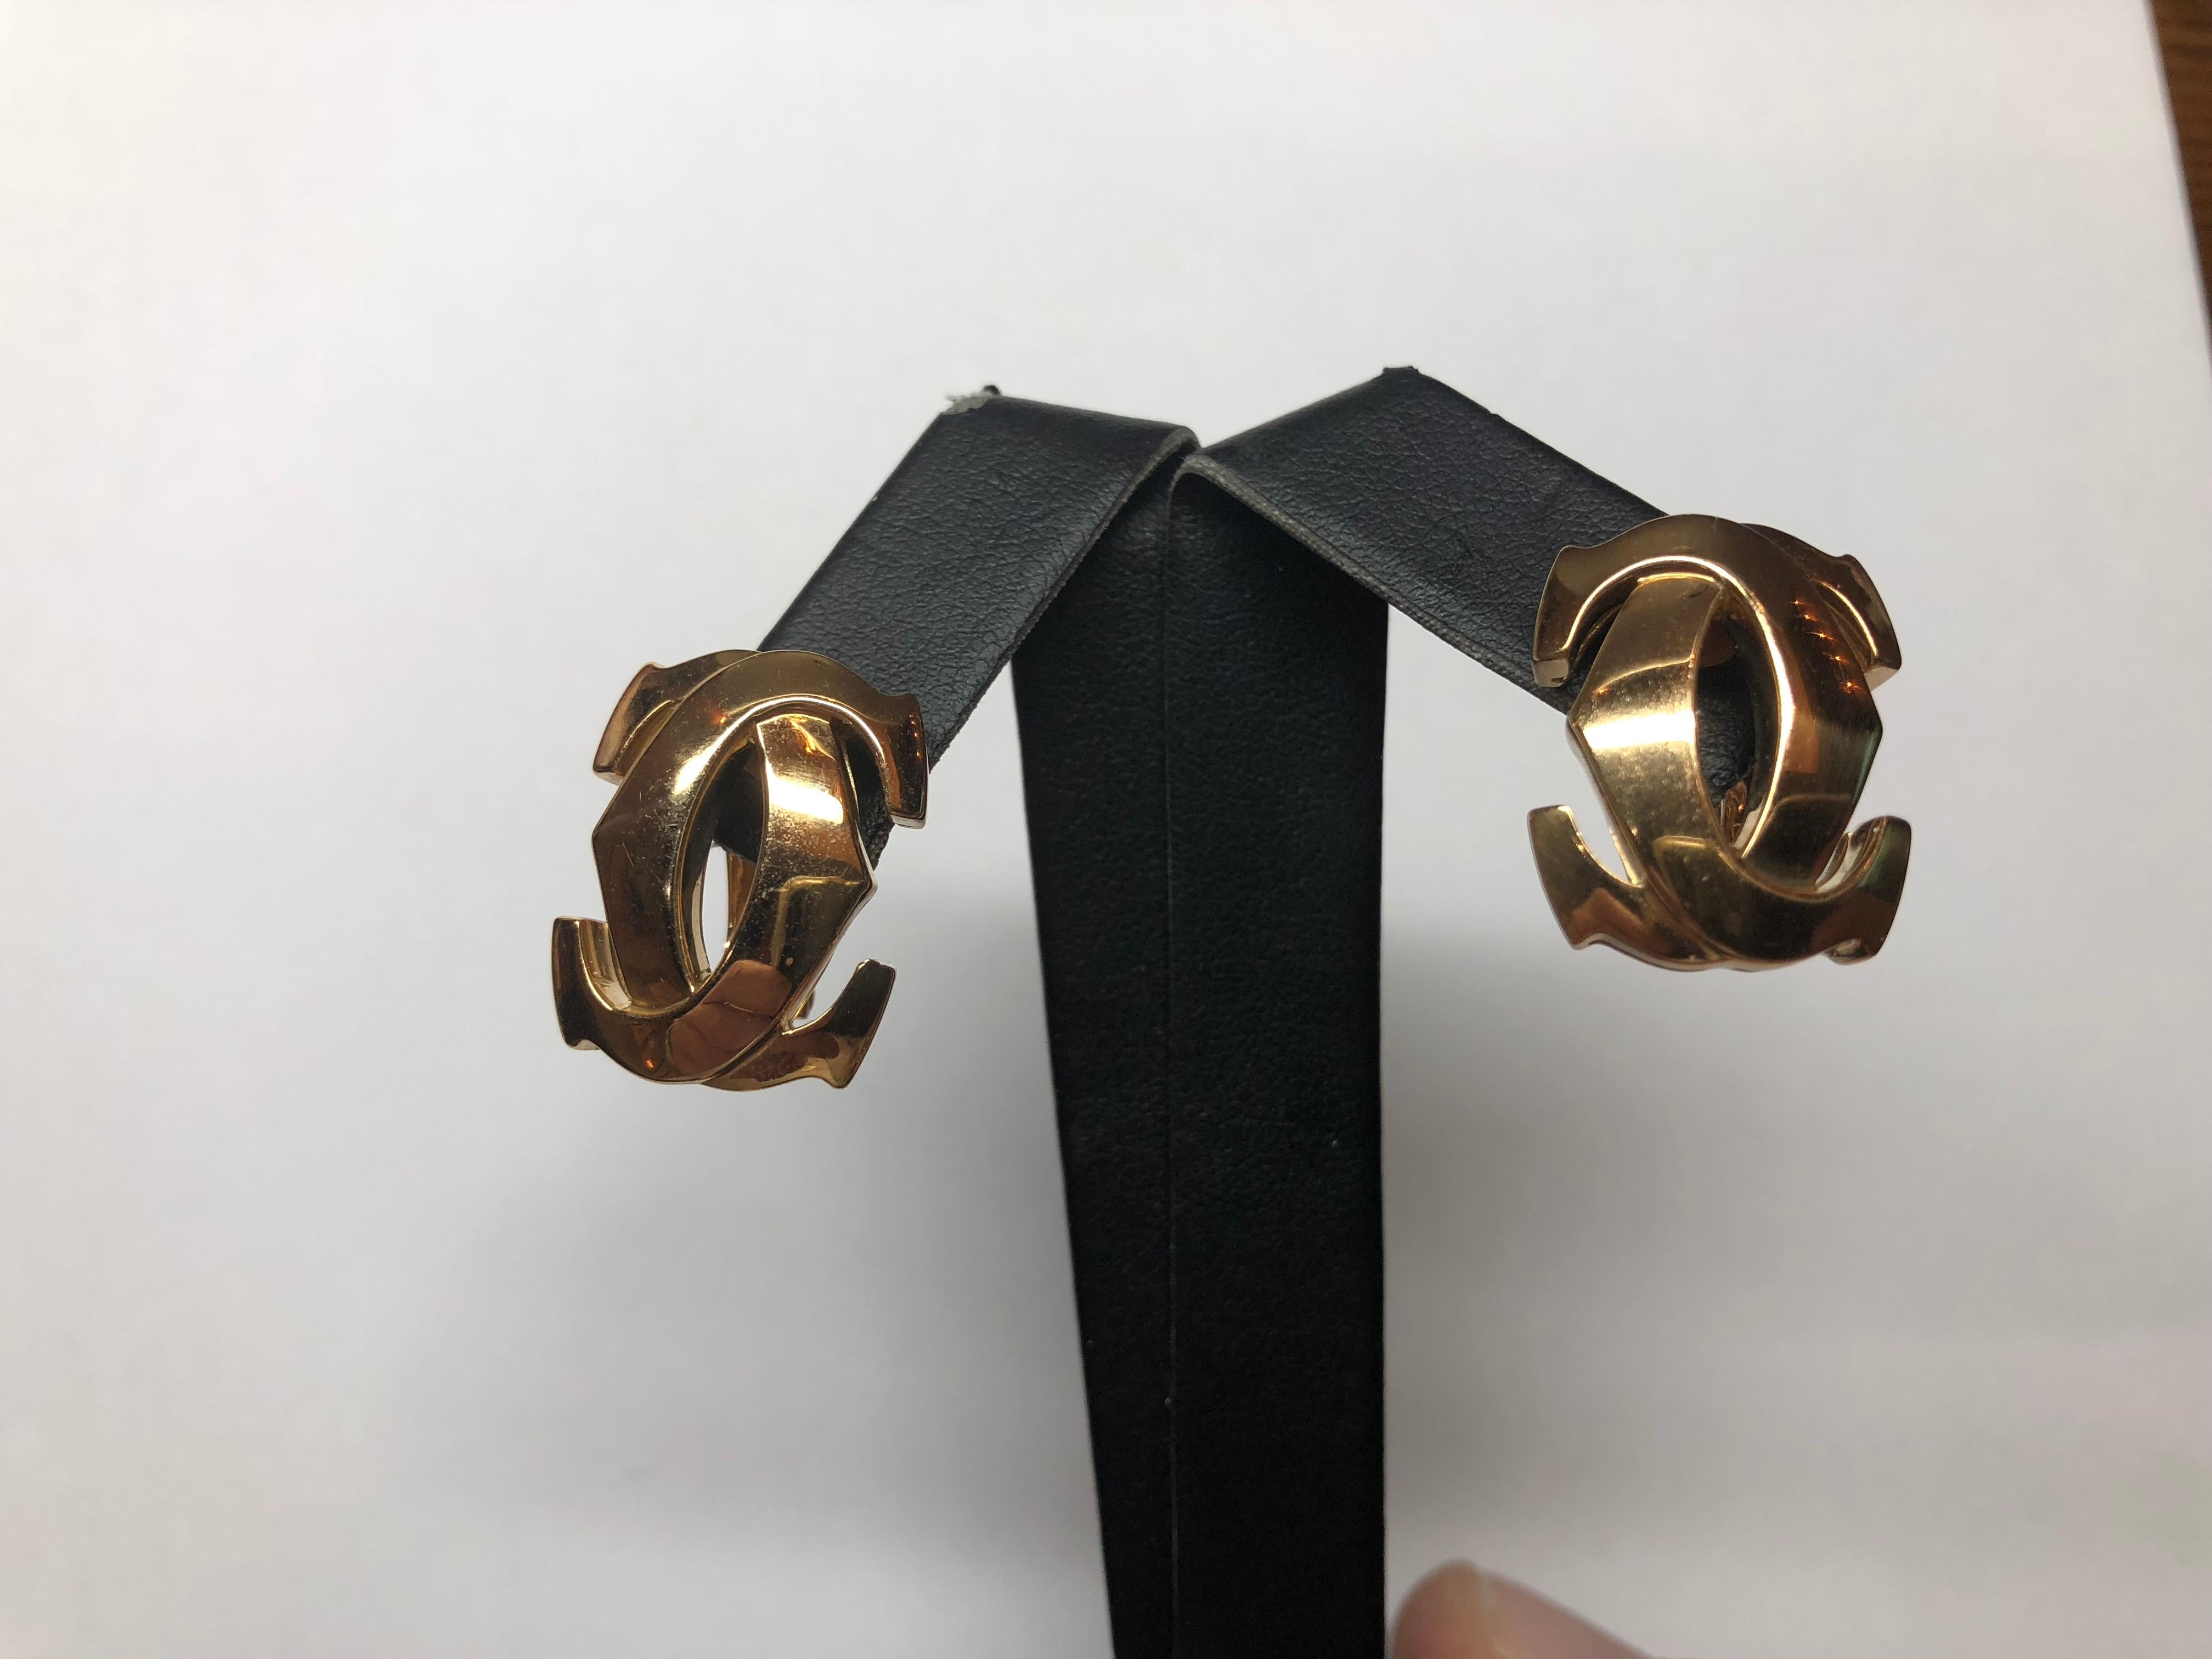 Cartier 18K Yellow Gold Penelope Double C earrings weighing 18 grams.  Excellent pre-owned condition.  Serial number 818828.